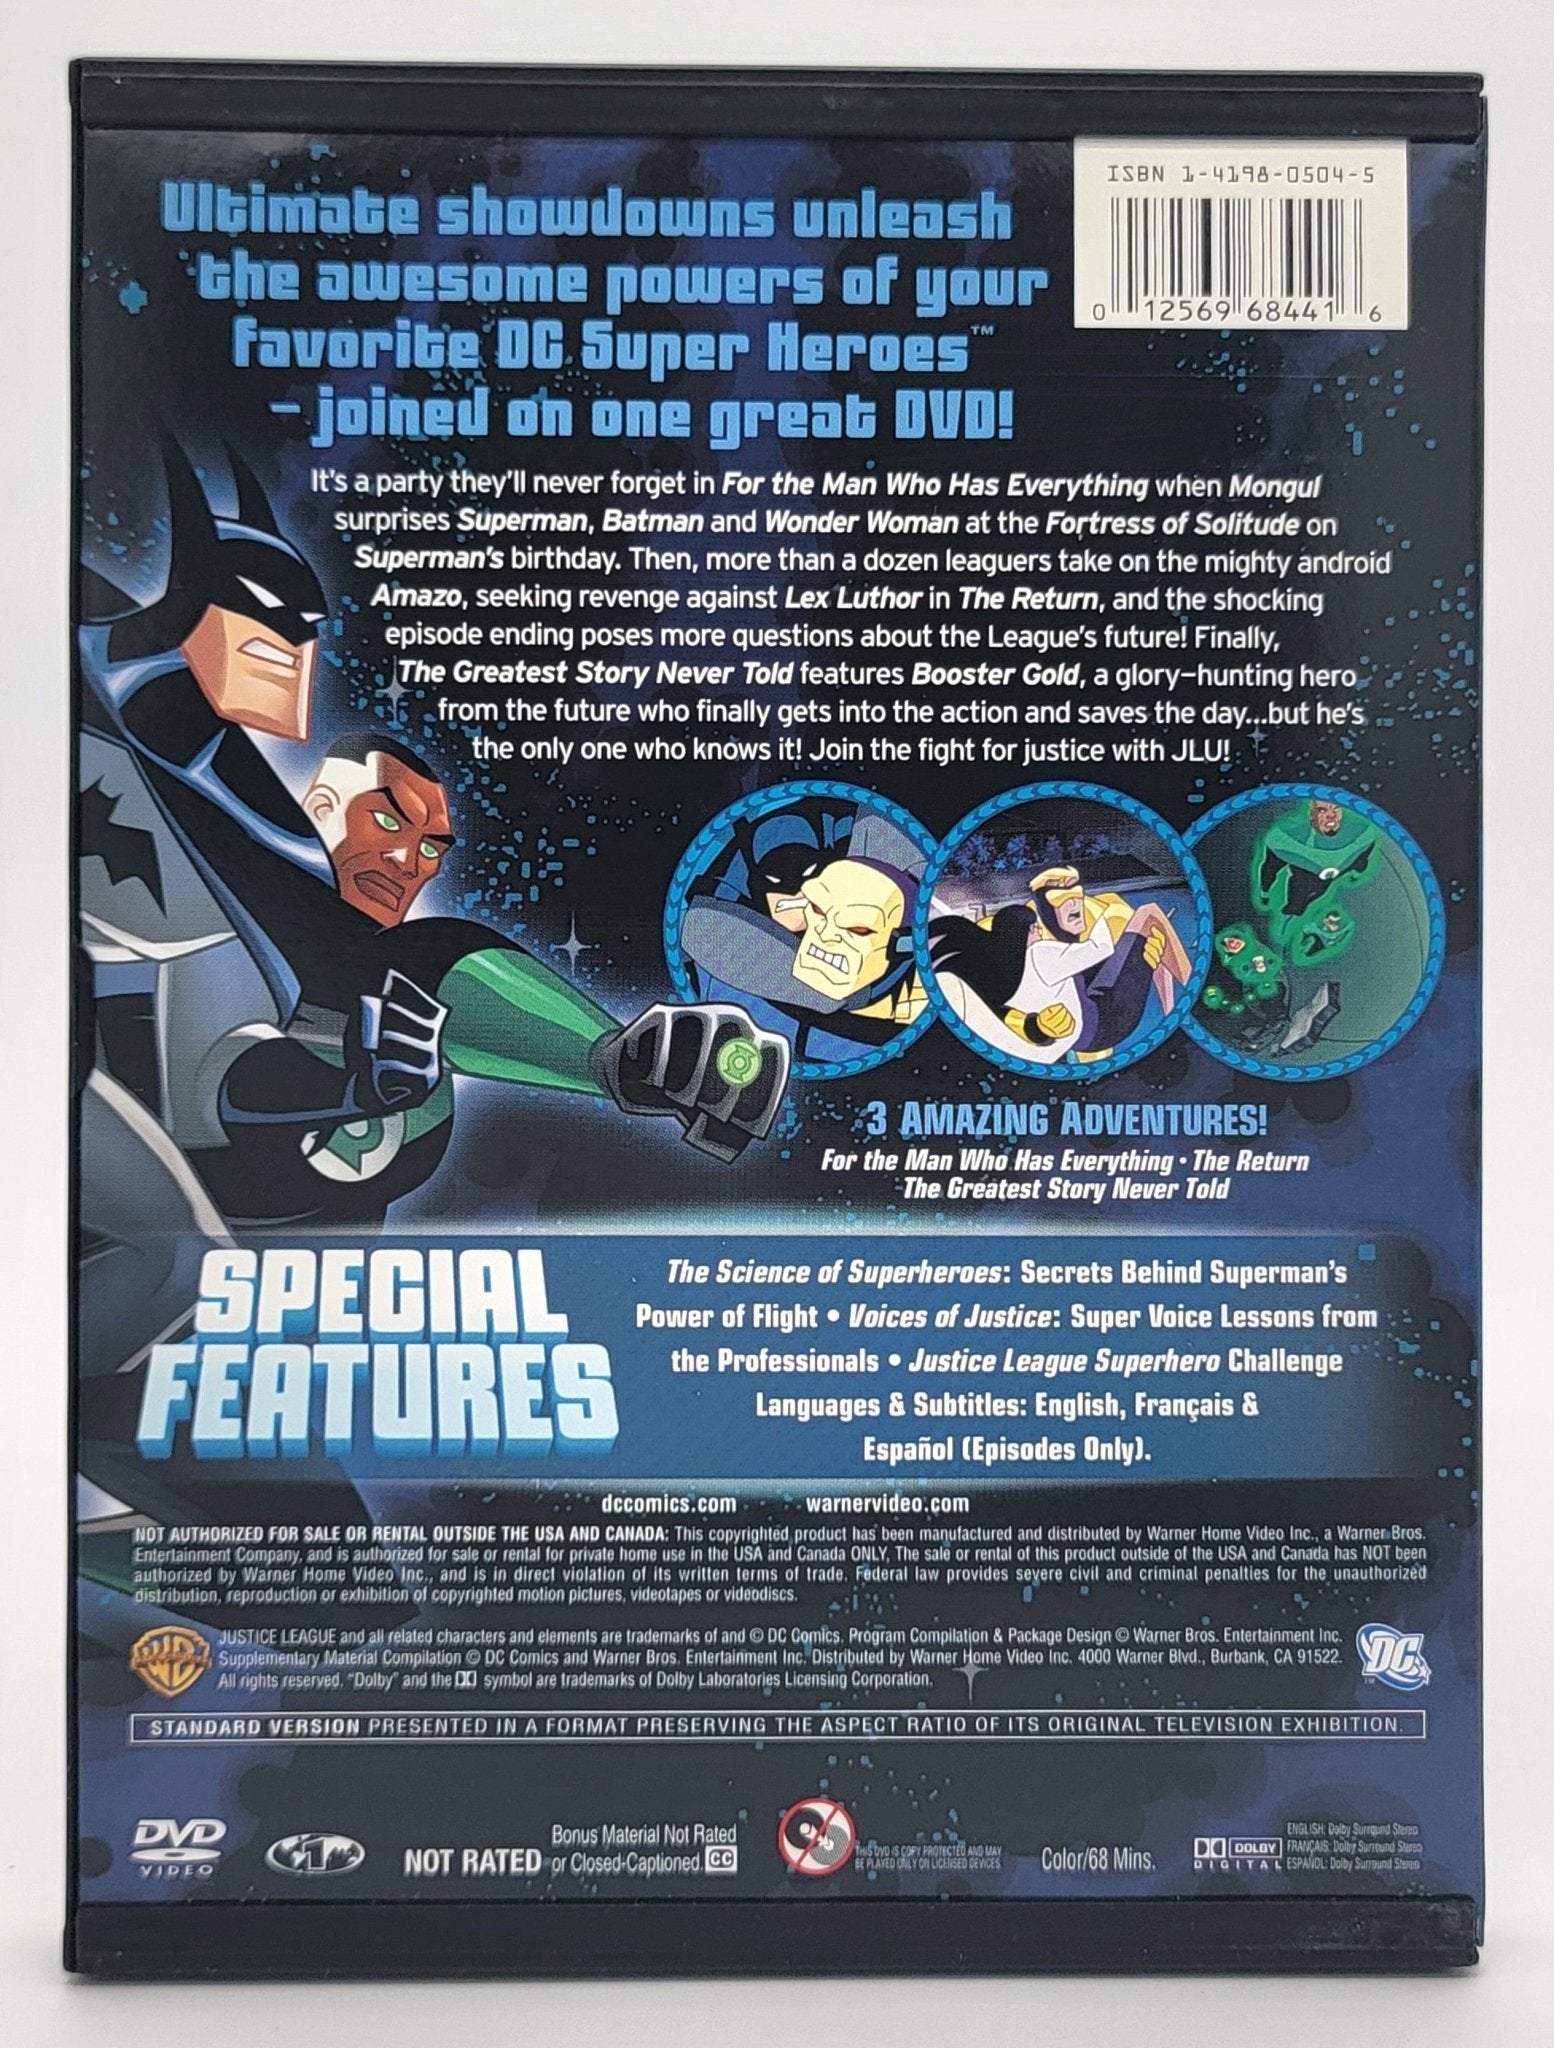 Studio Distribution Services - Justice League Unlimited - Joining Forces | DVD | DC Comis Kids Collection - DVD - Steady Bunny Shop